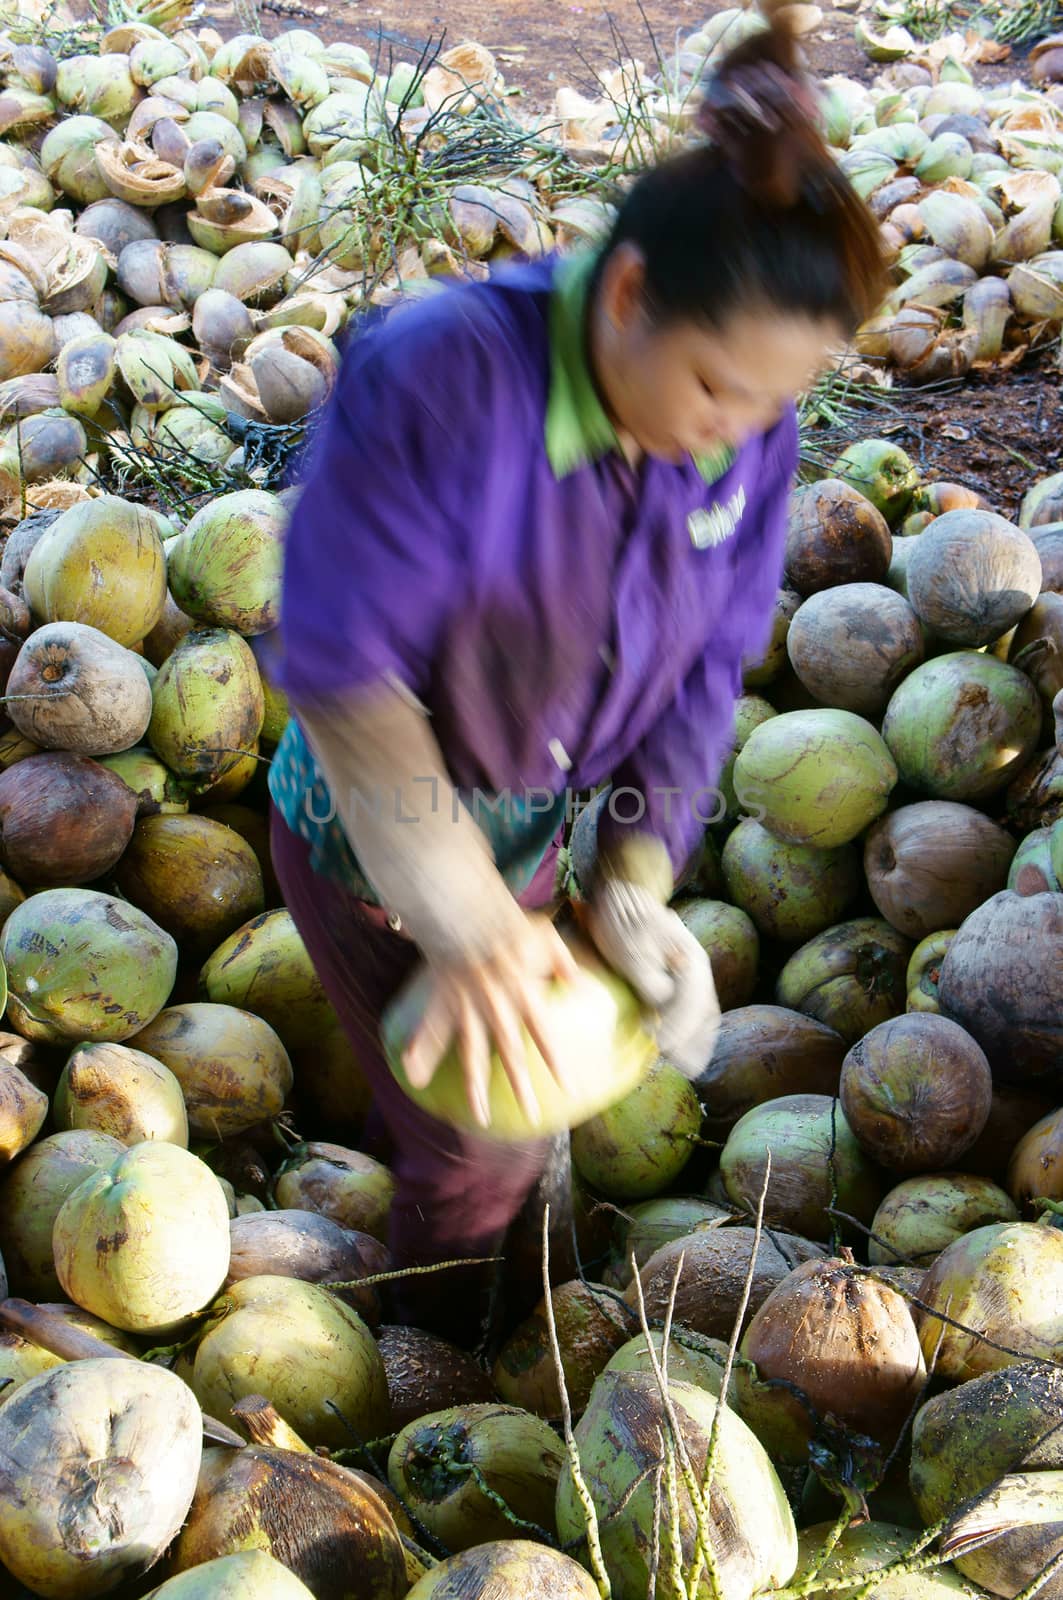 Asian worker, coconut, Vietnamese, Mekong Delta by xuanhuongho